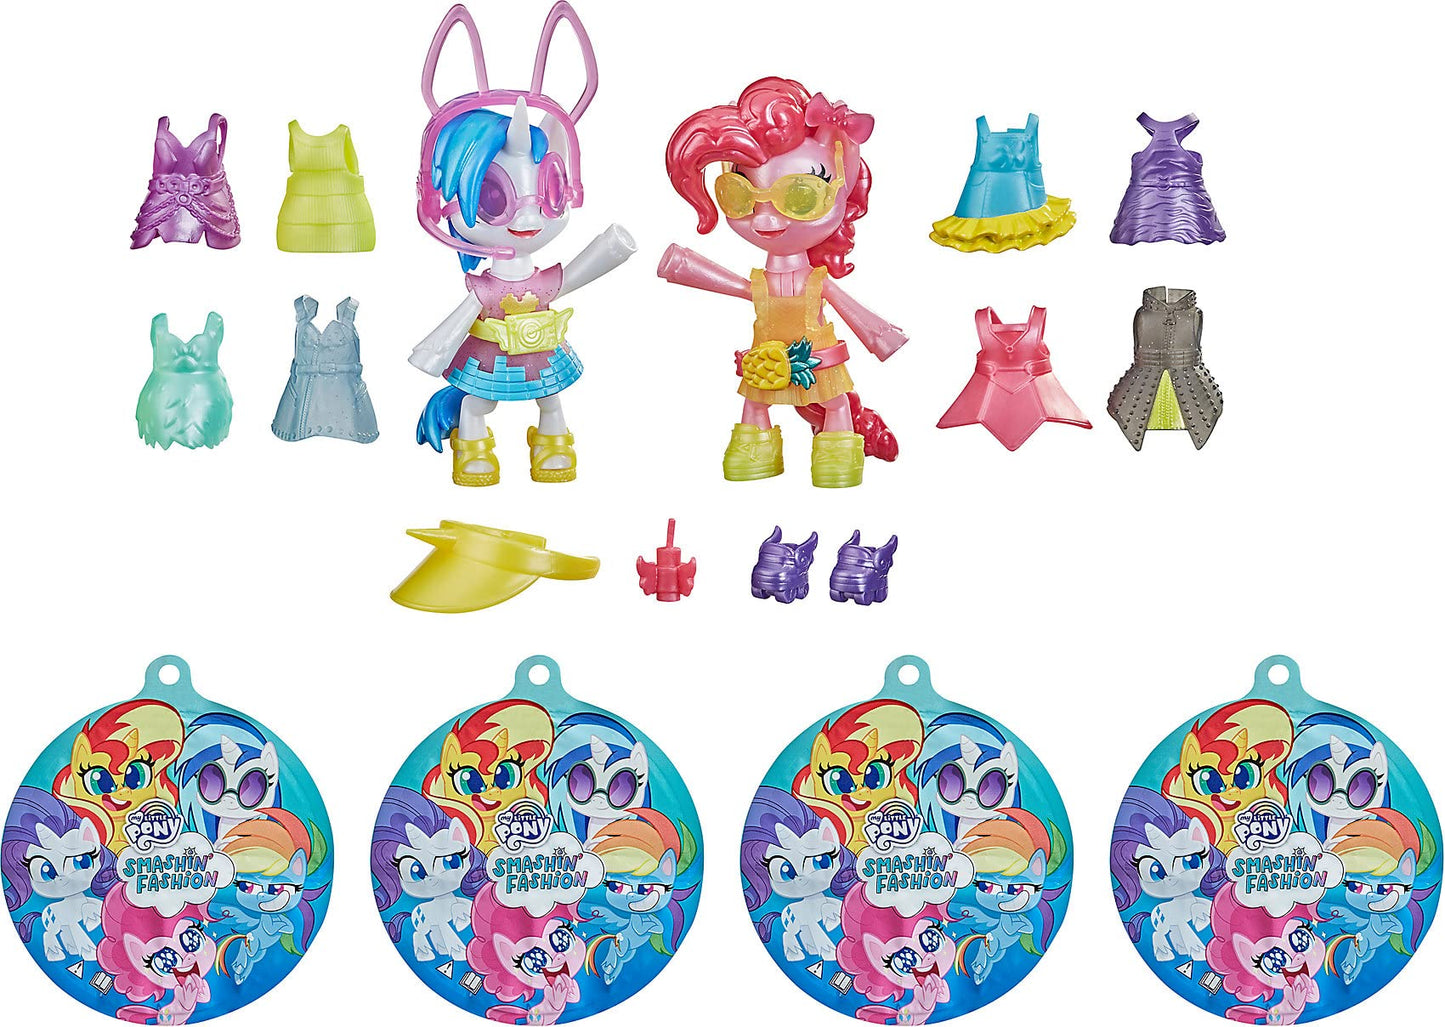 My Little Pony Smashin Fashion Party 2-Pack -- 30 Pieces, Pinkie Pie and DJ Pon-3 Poseable Figures and Surprise Fashion Toy Accessories